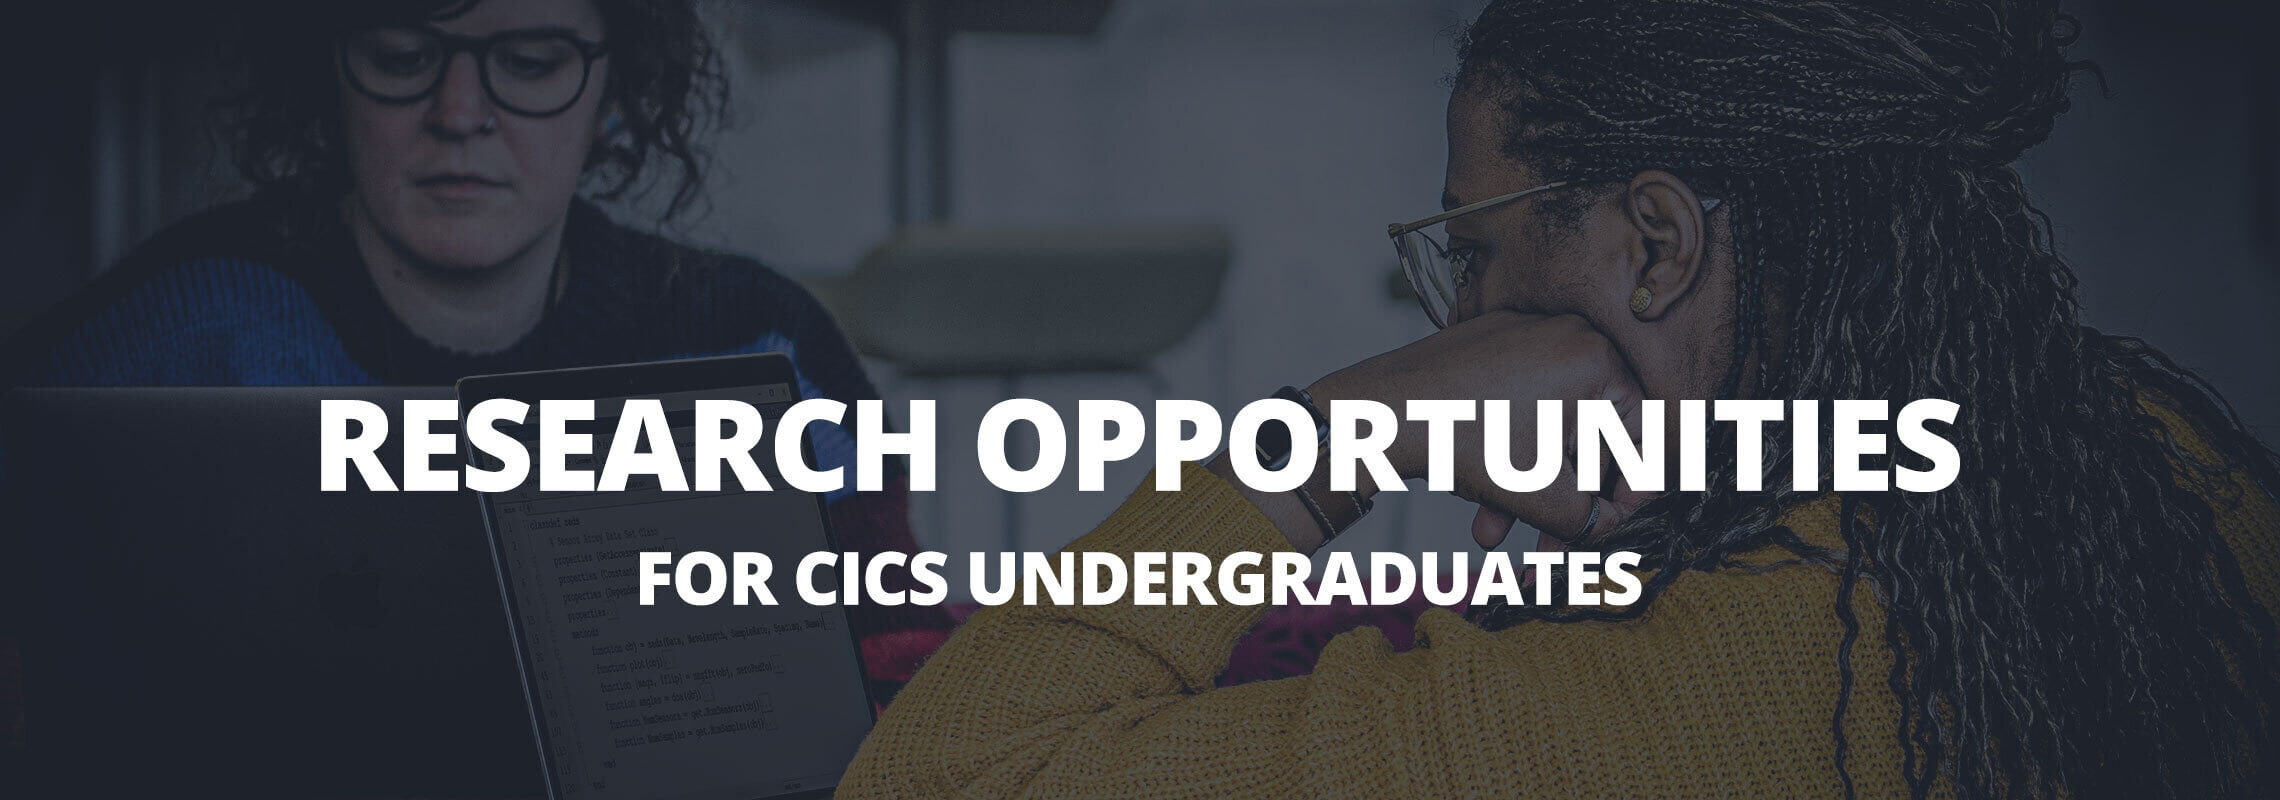 Research Opportunities for CICS Undergraduates